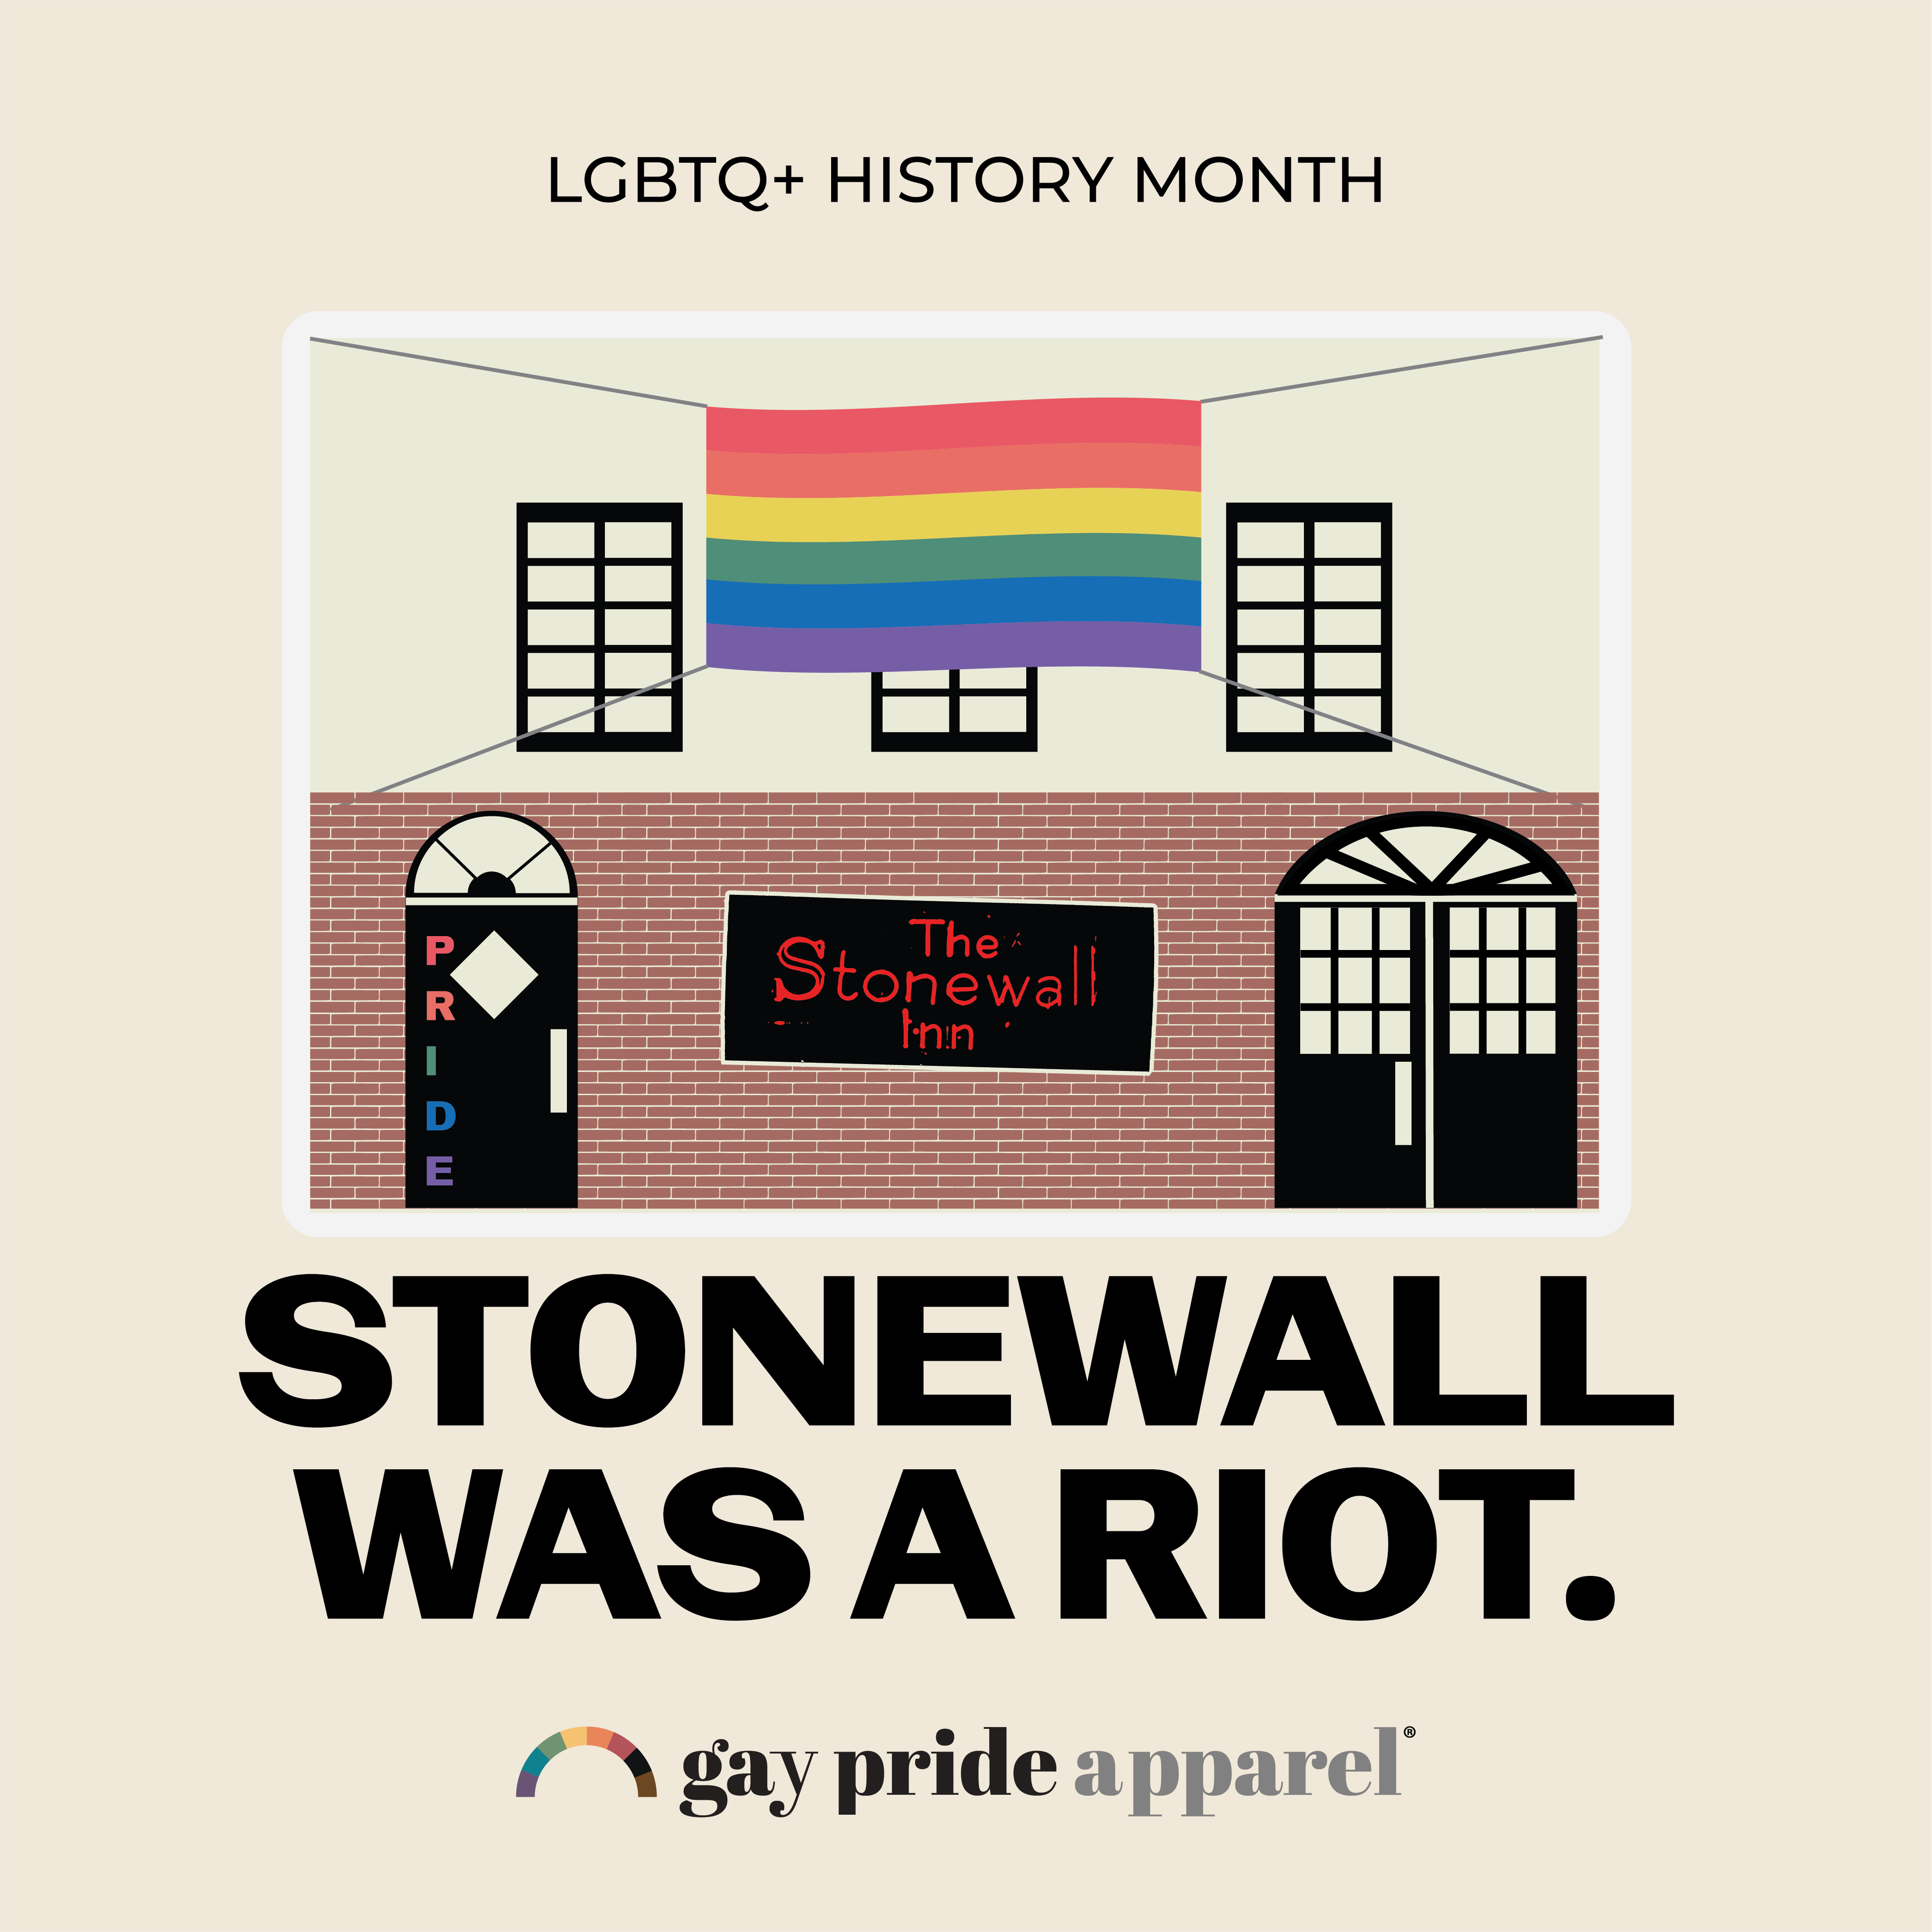 The Stonewall Riots: A Turning Point in LGBTQ+ History and Its Enduring Impact